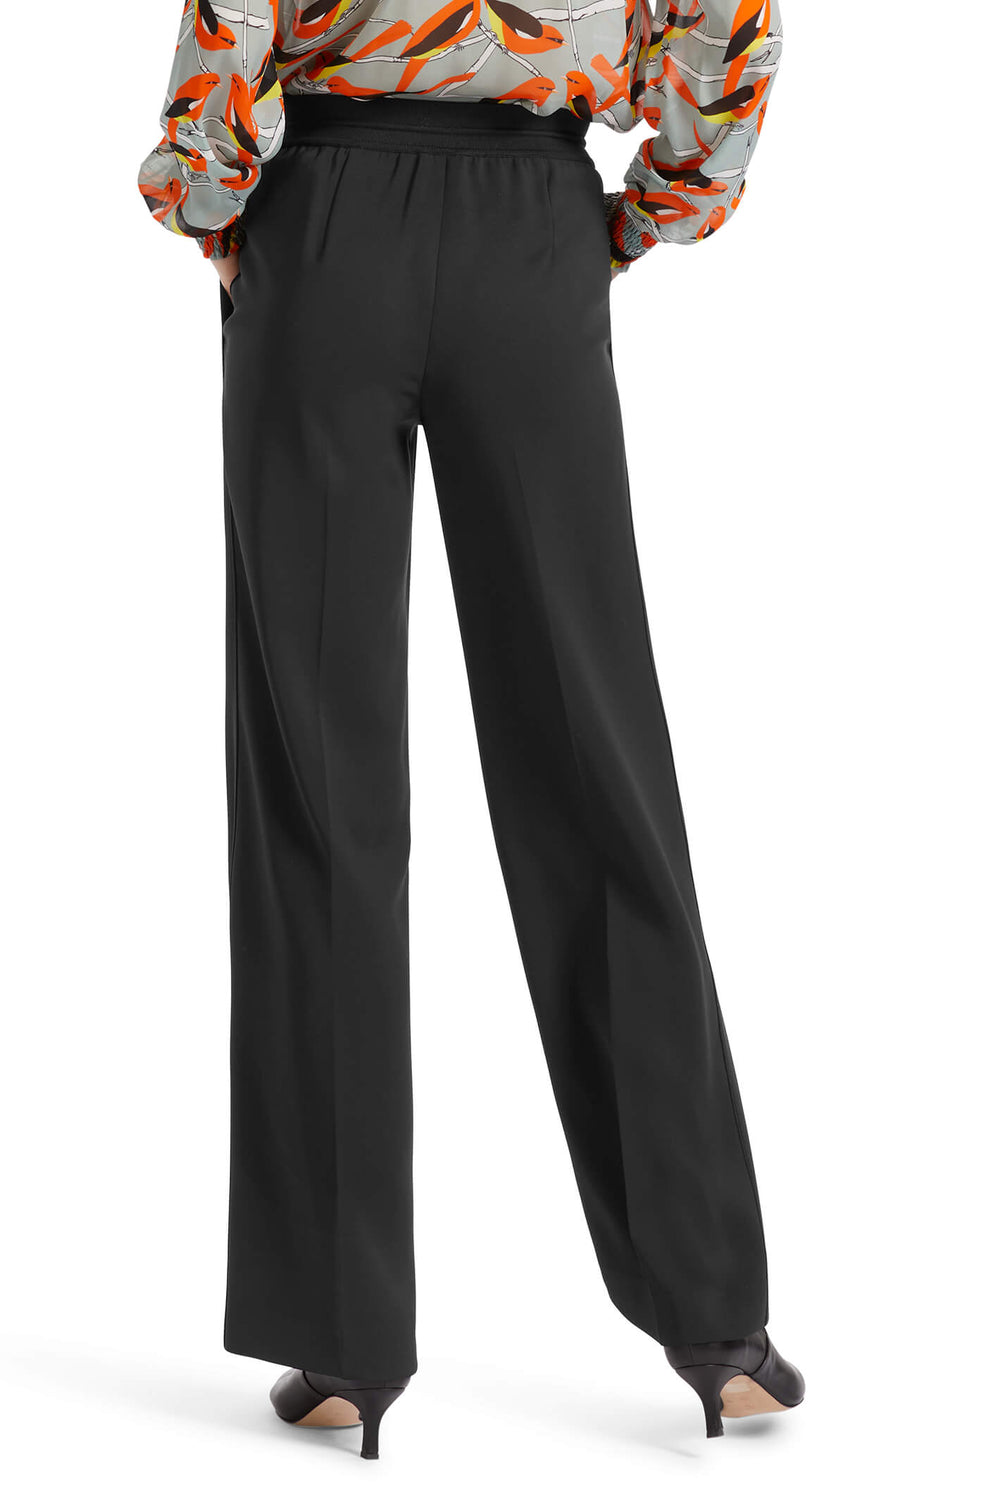 Marc Cain Collections VC 81.14 W56 Waukee 900 Black Wide Fit Trousers - Olivia Grace Fashion